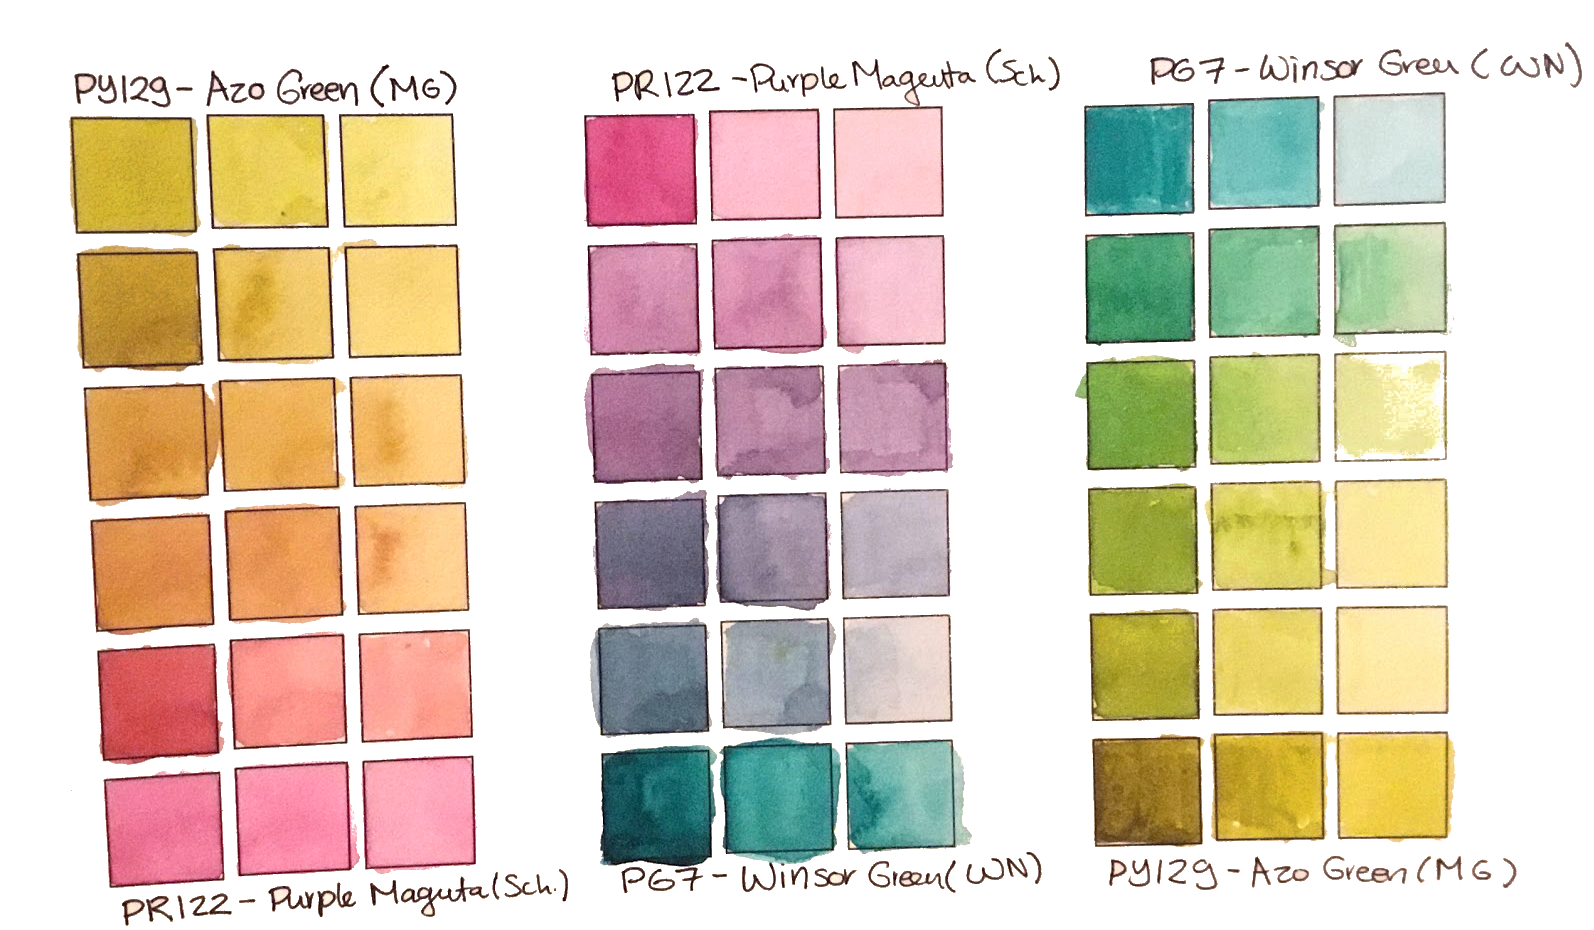 2017 Watercolour Palette Tour - Introducing the giant 52-pan